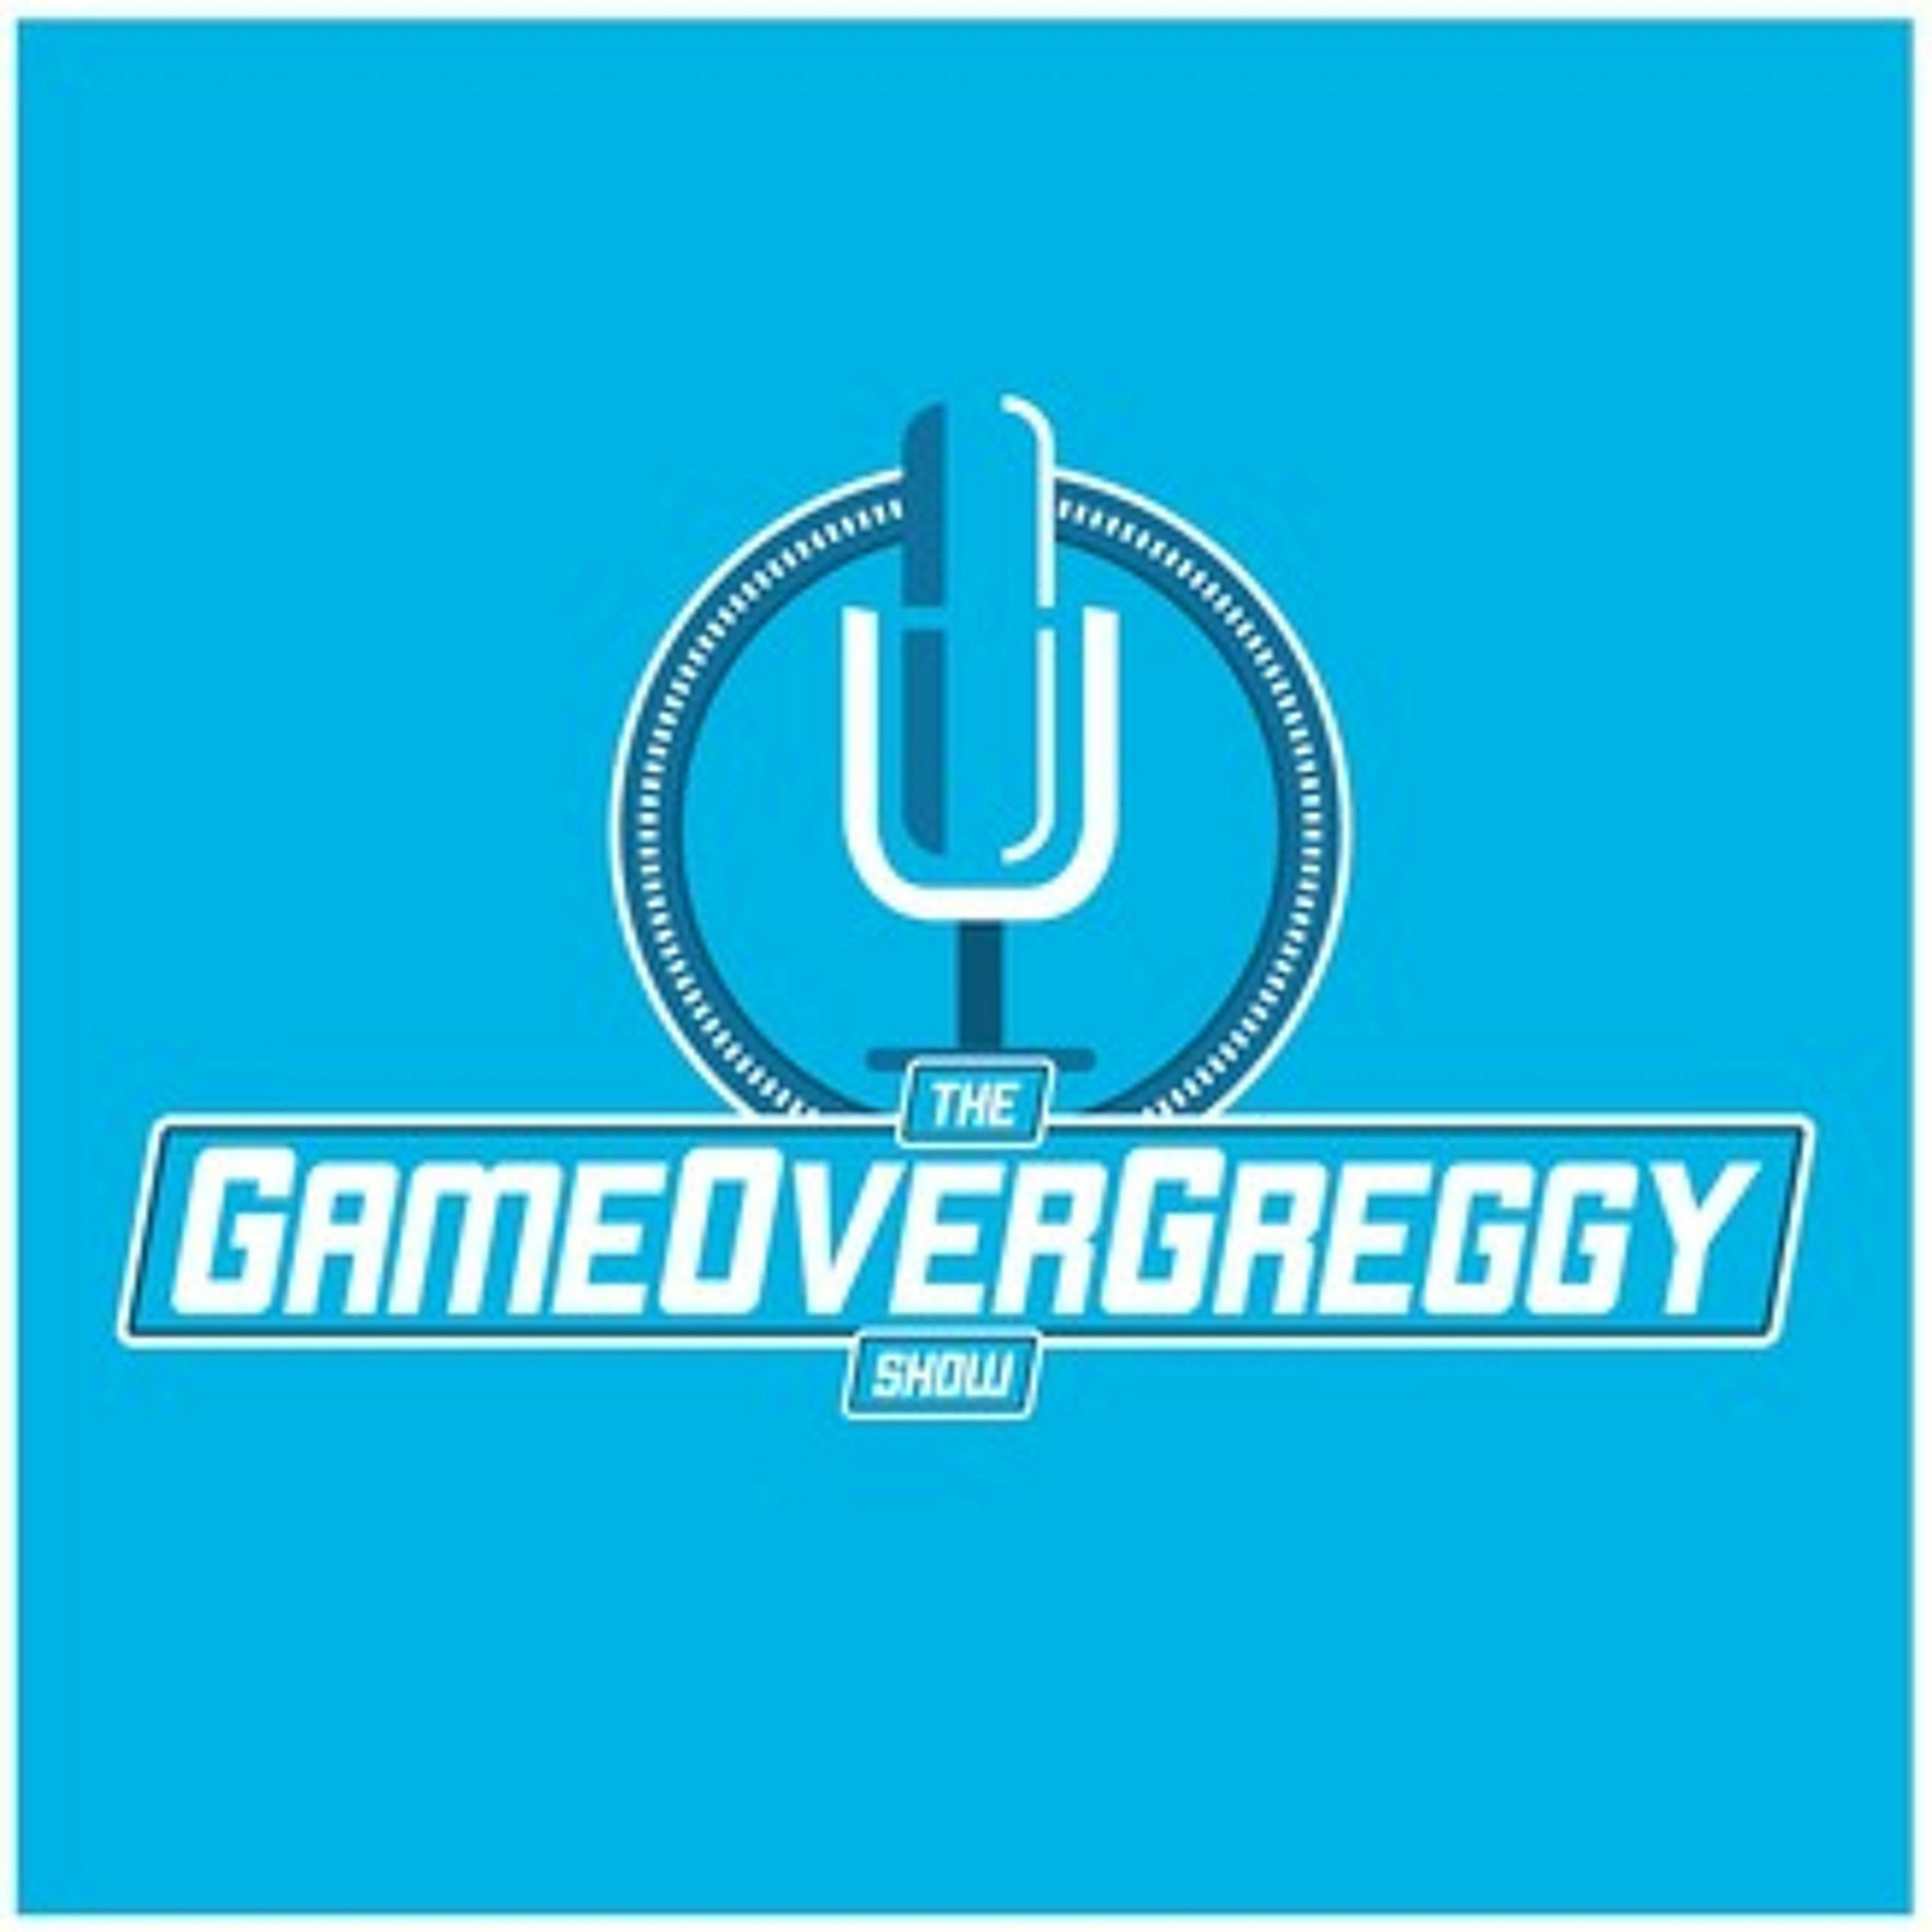 Masculinity in 2018 - The GameOverGreggy Show Ep. 234